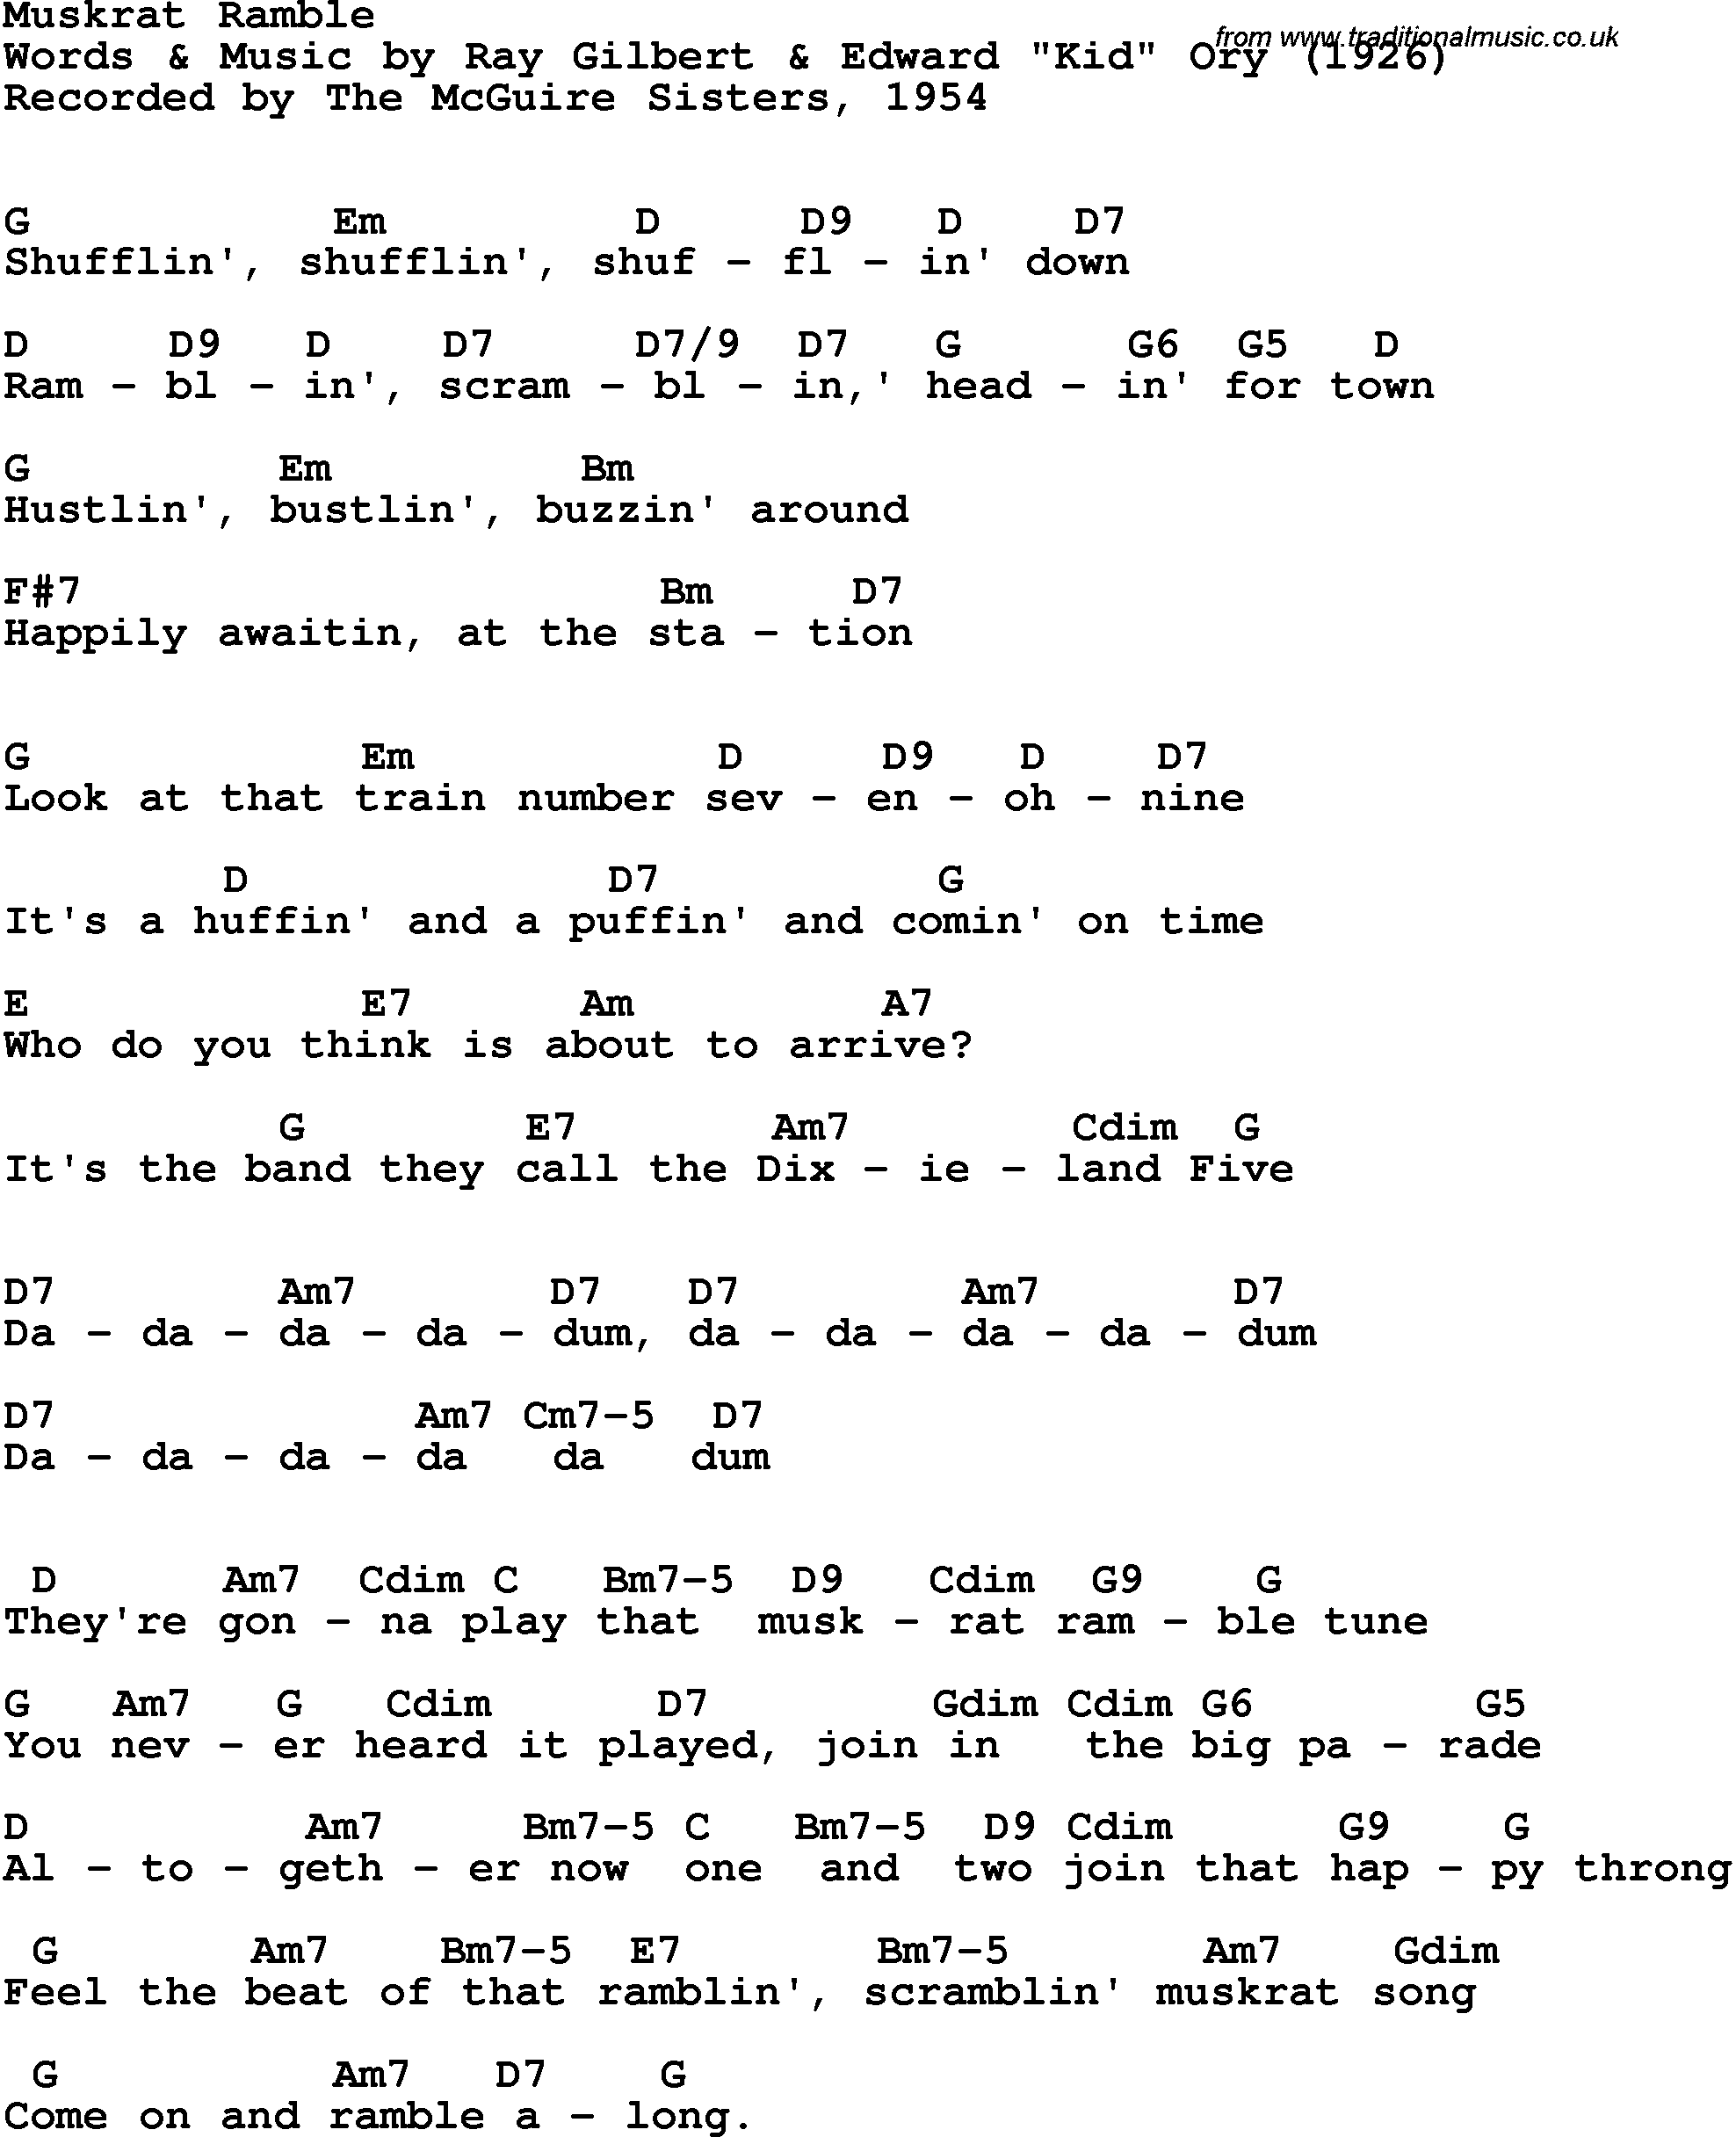 Song Lyrics with guitar chords for Muskrat Ramble - The Mcguire Sisters, 1954